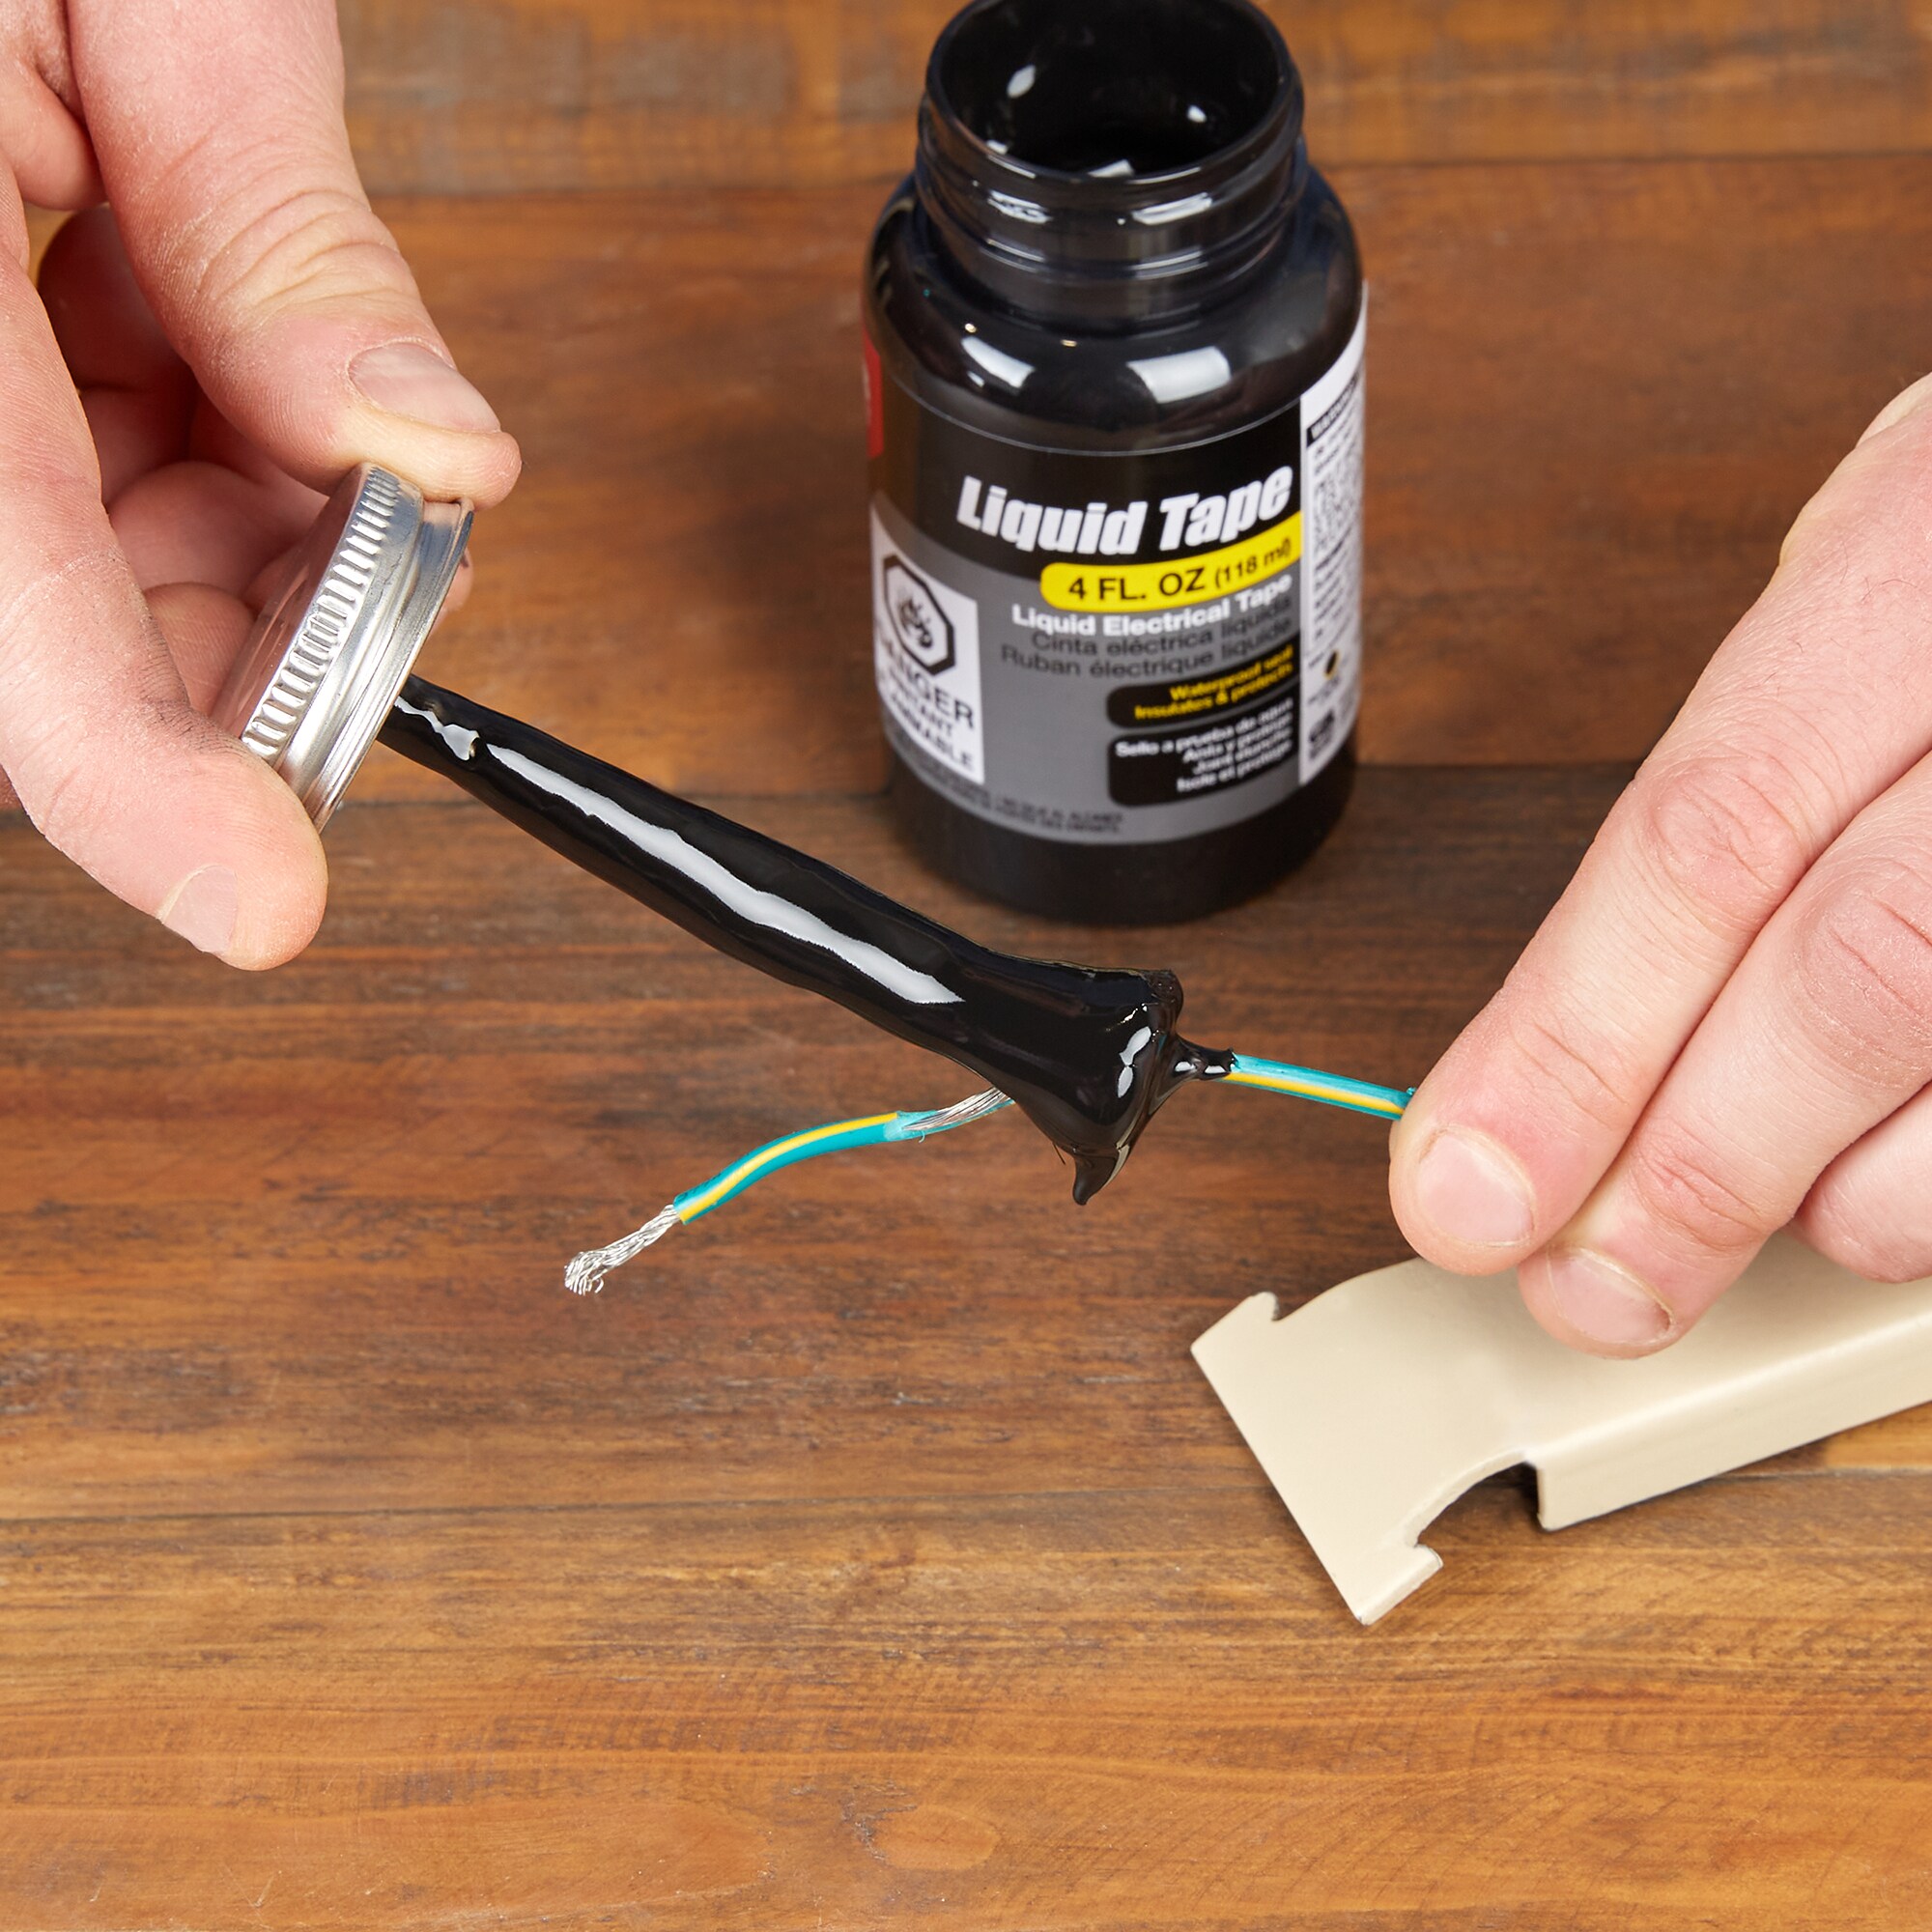 Protect your electronics with Liquid Electrical Tape